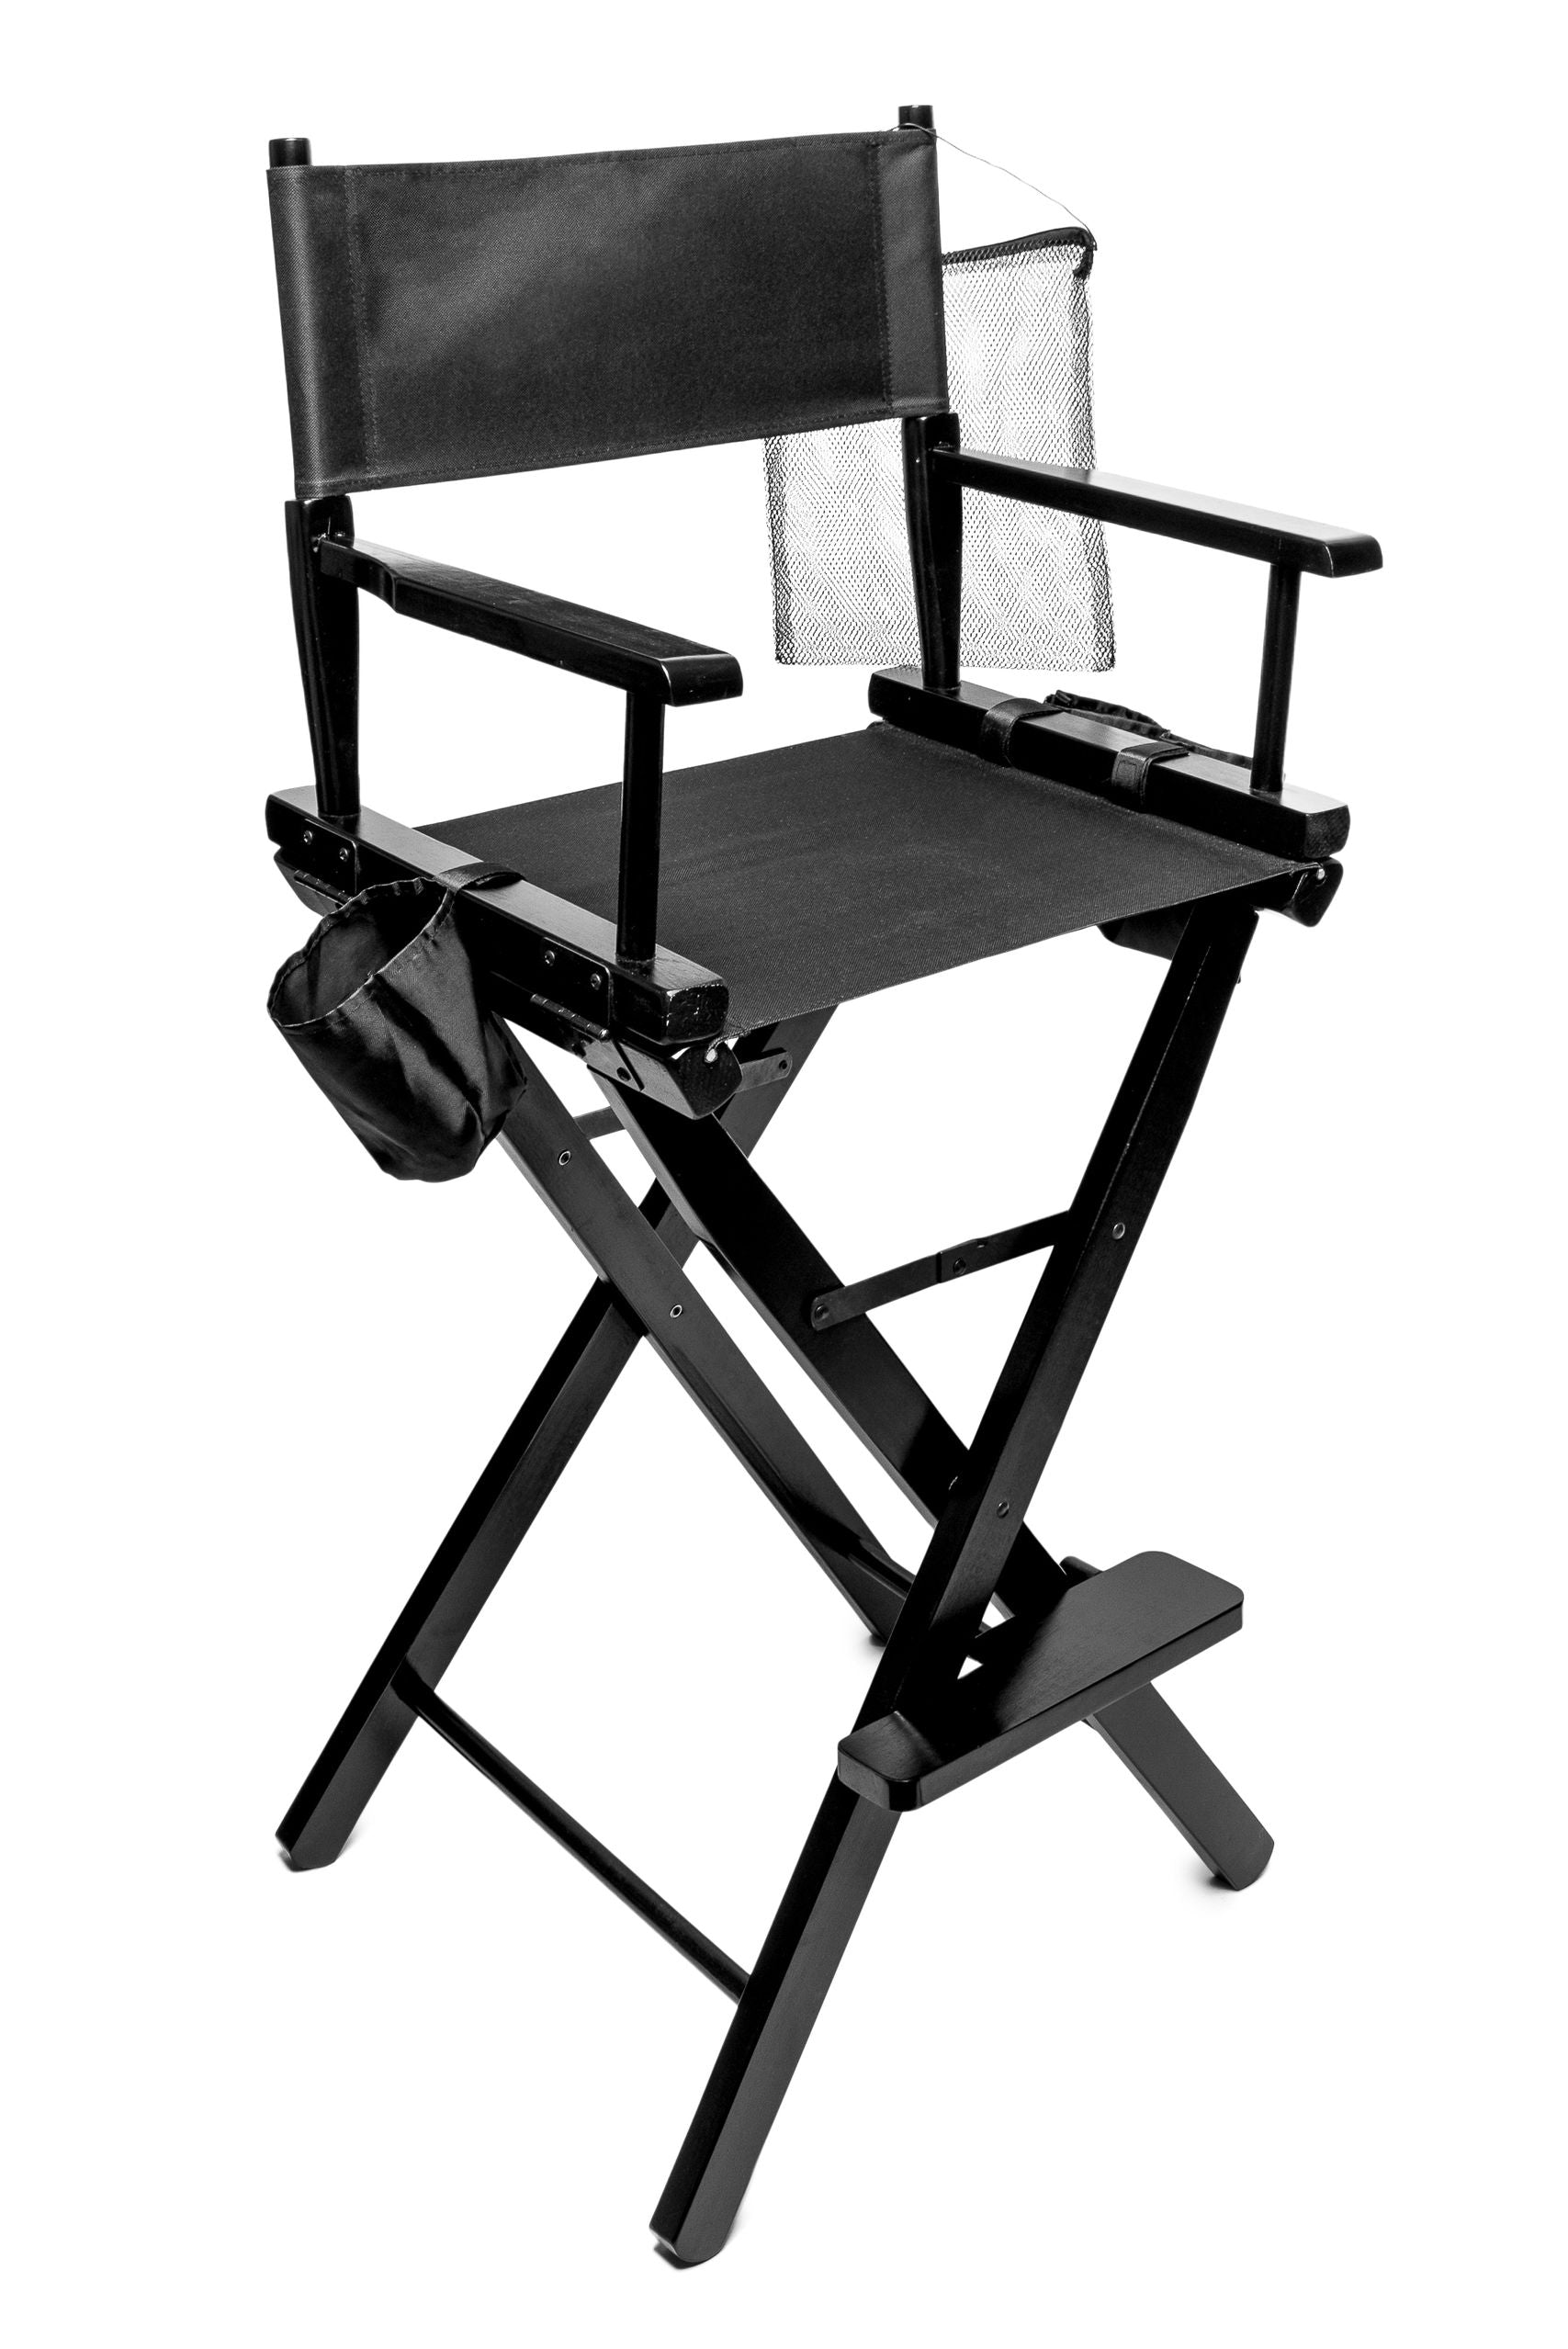 angled view of professional make up artists chair with removable net storage pouches visible 